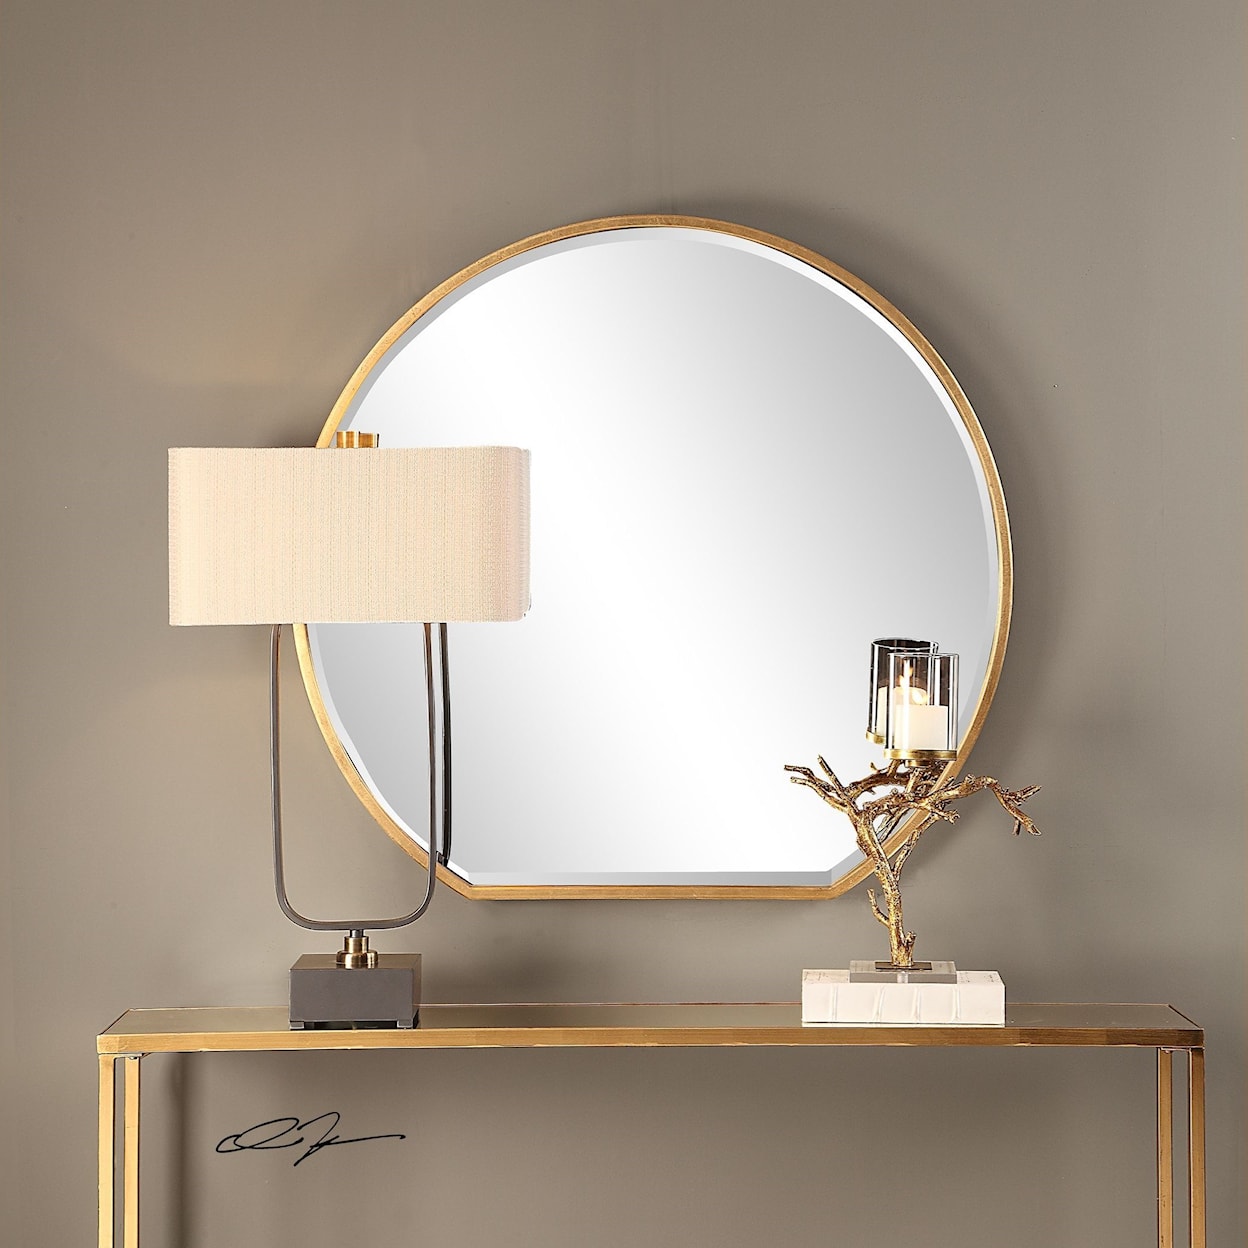 Uttermost Mirrors Cabell Gold Mirror